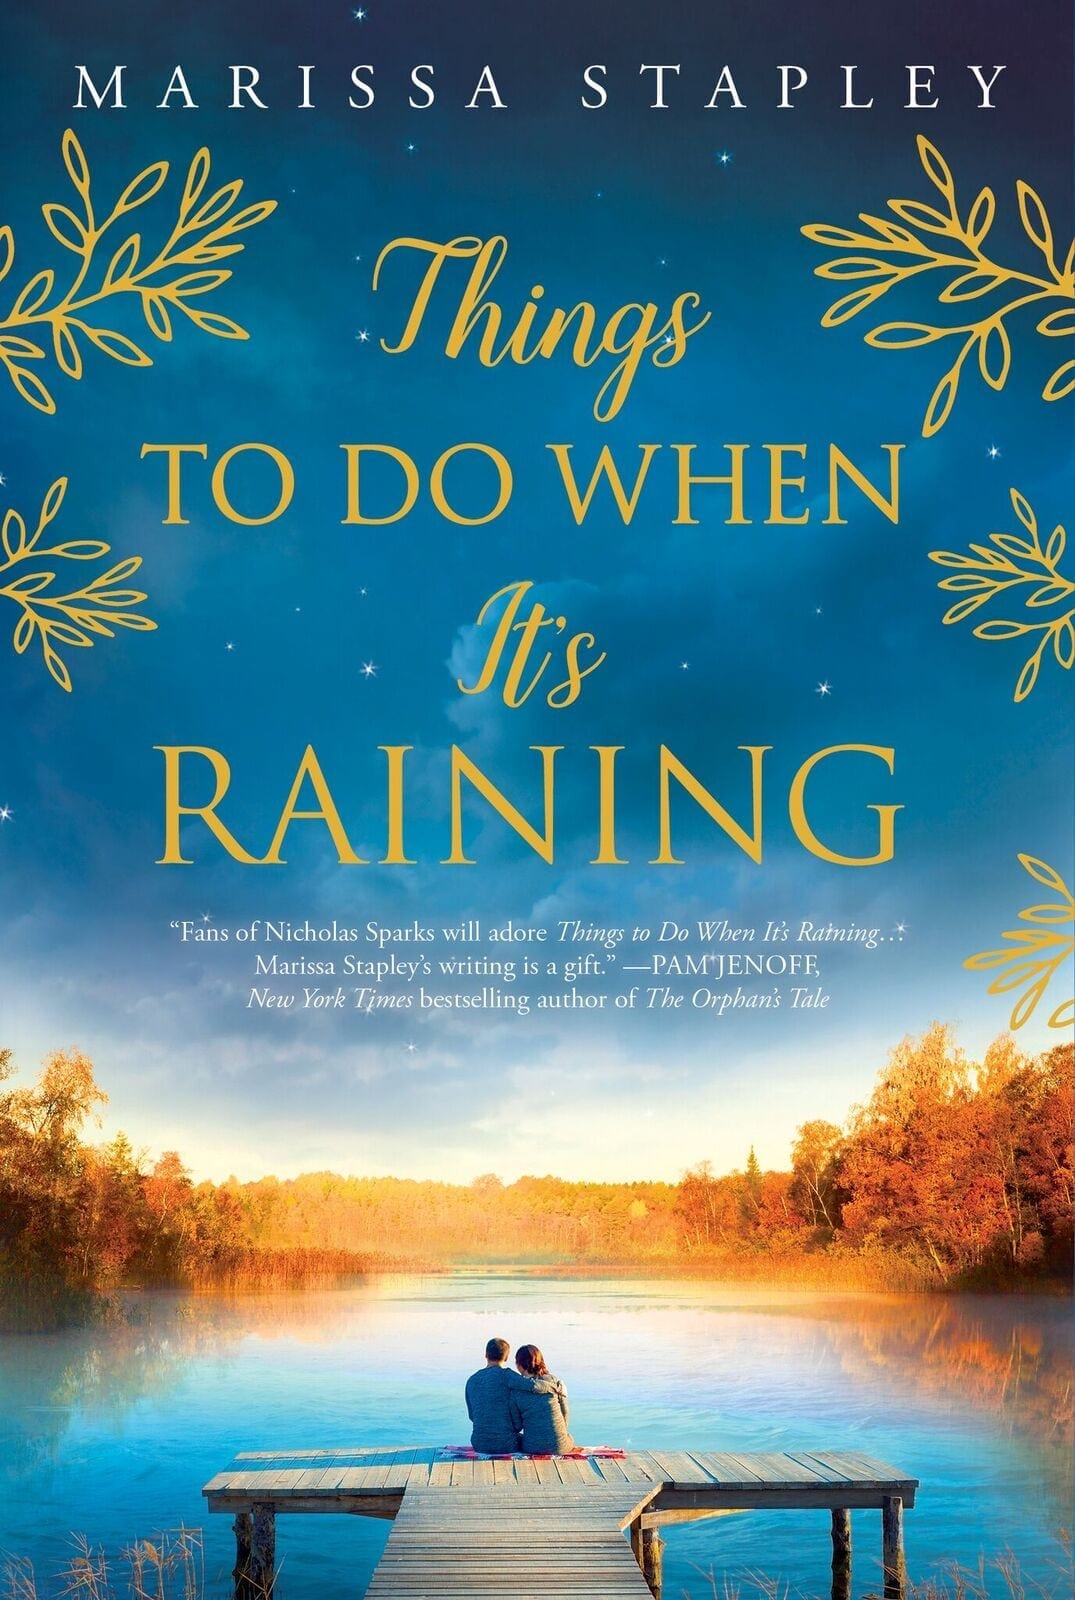 Things to Do When It's Raining by Marissa Stapley